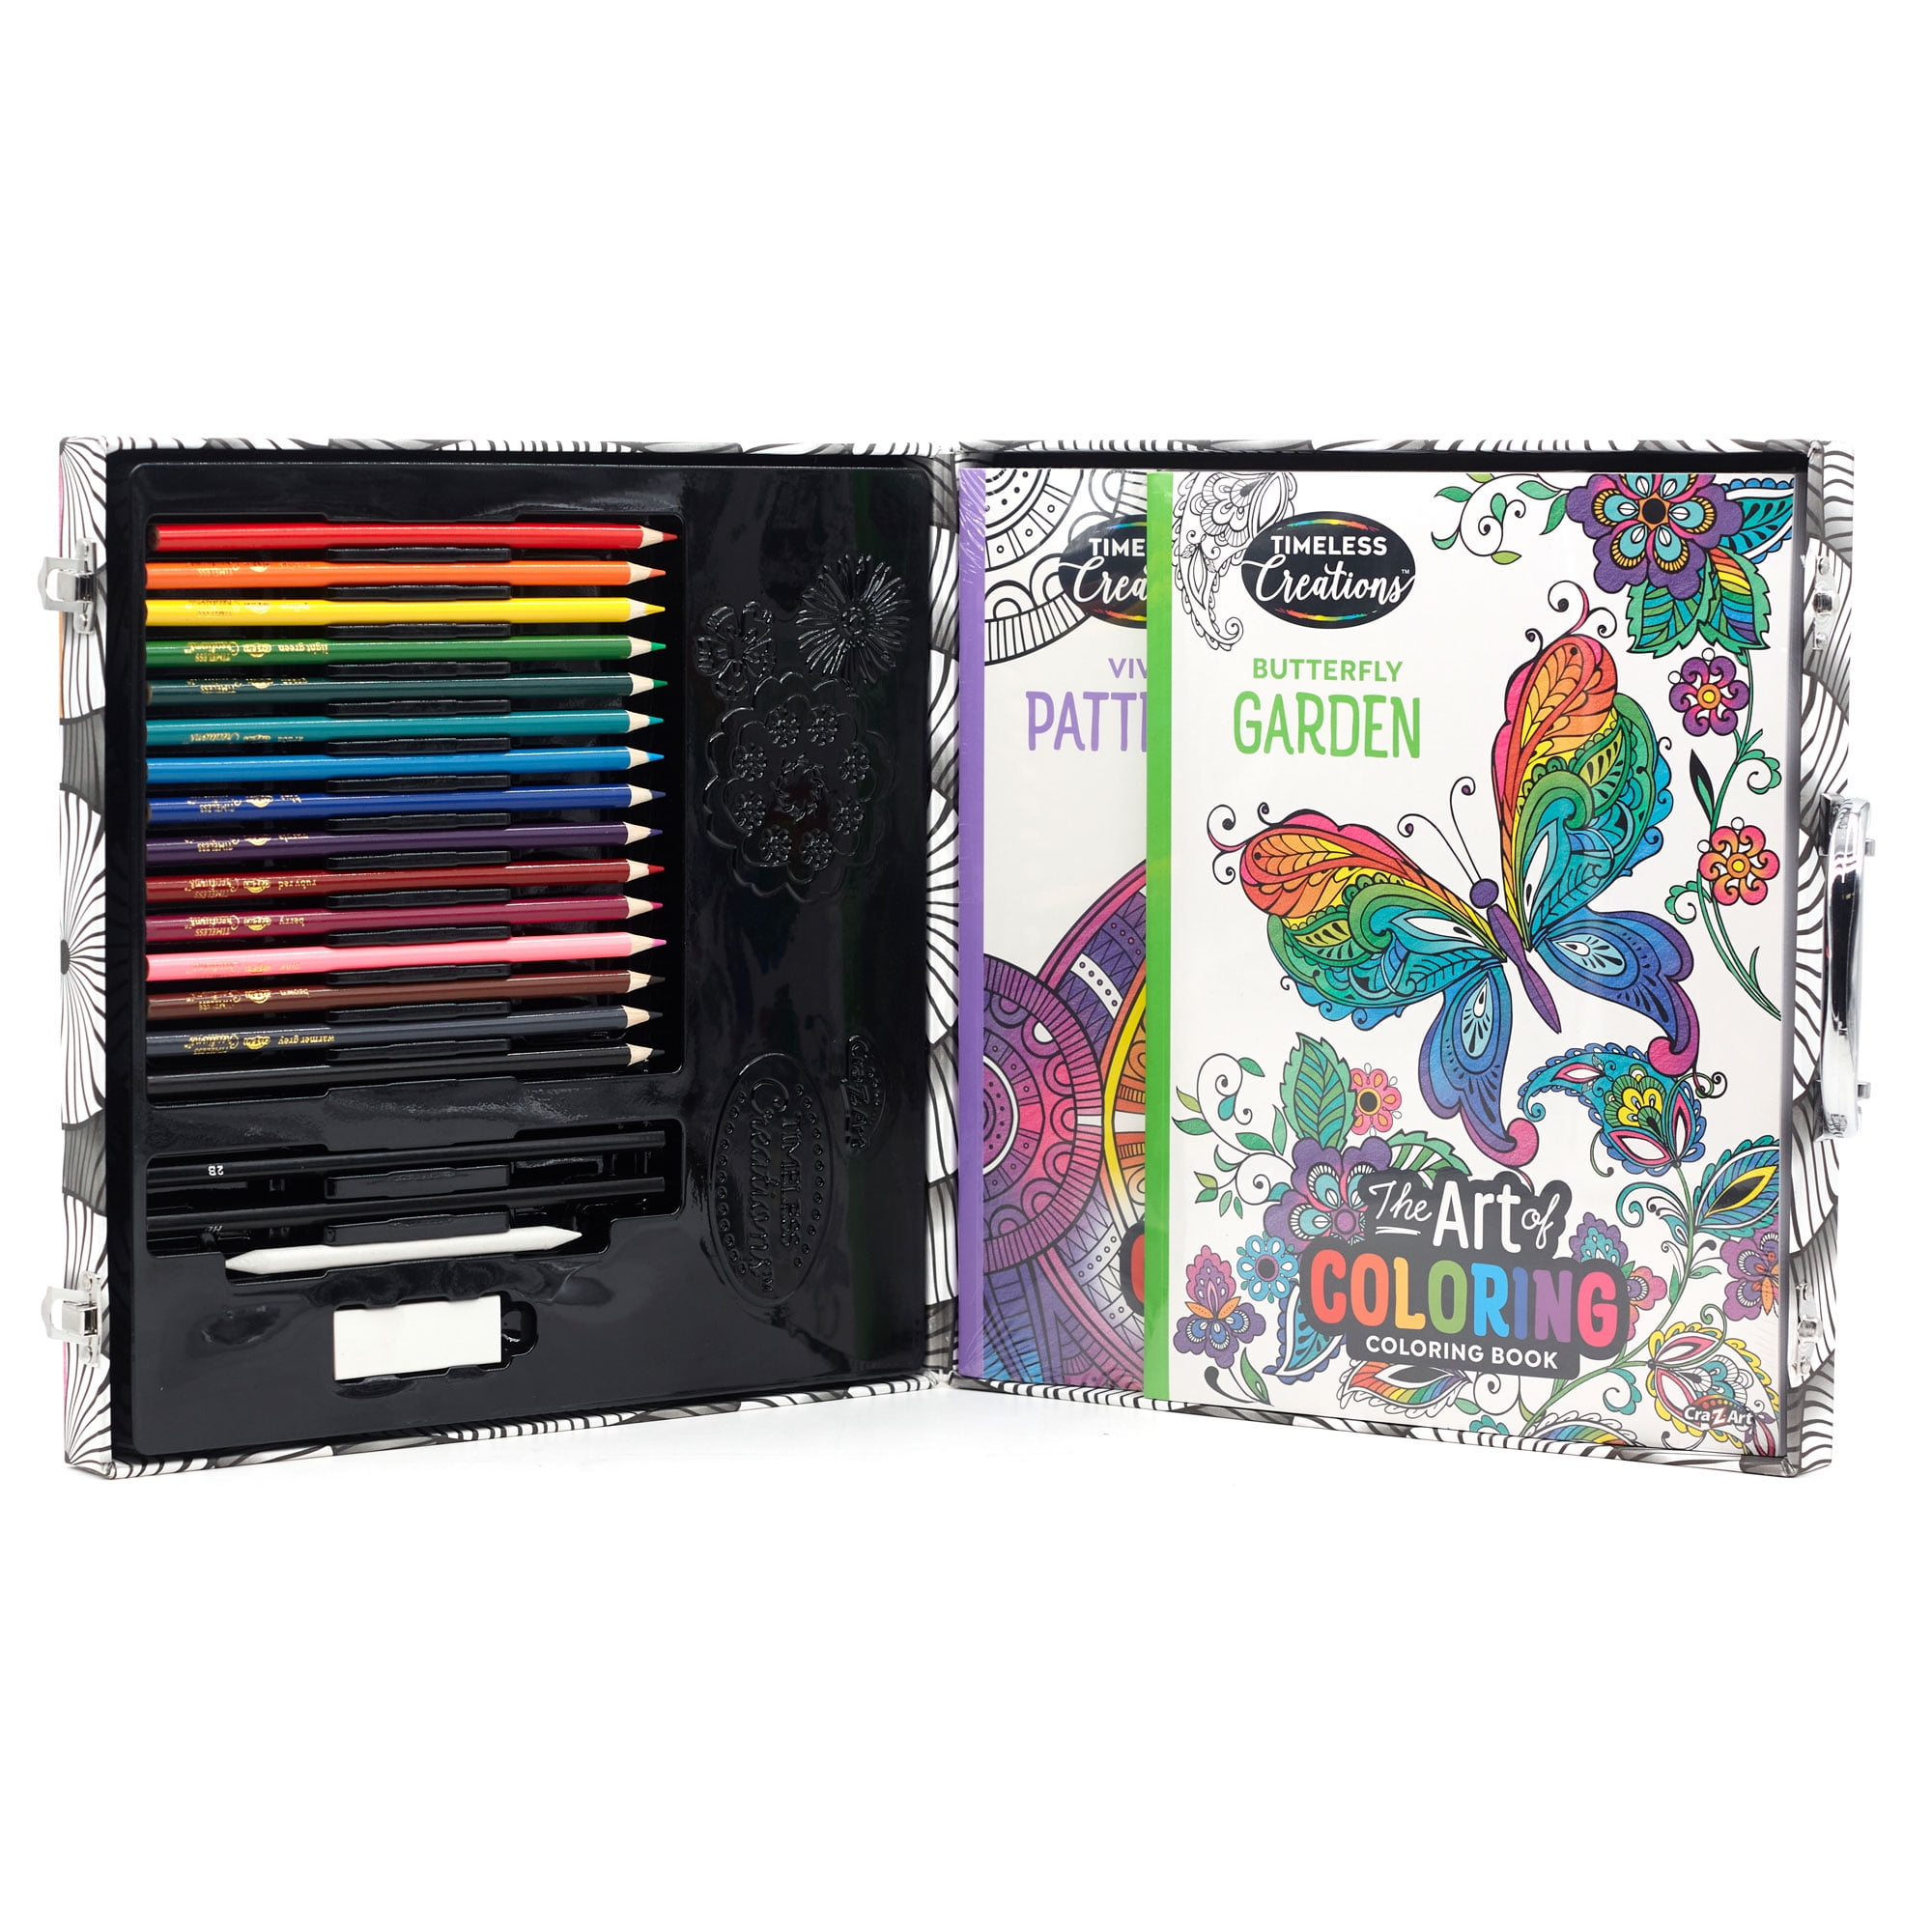 Timeless Creations The Art of Coloring Studio Art Case Only $9.97 (Reg. $20)